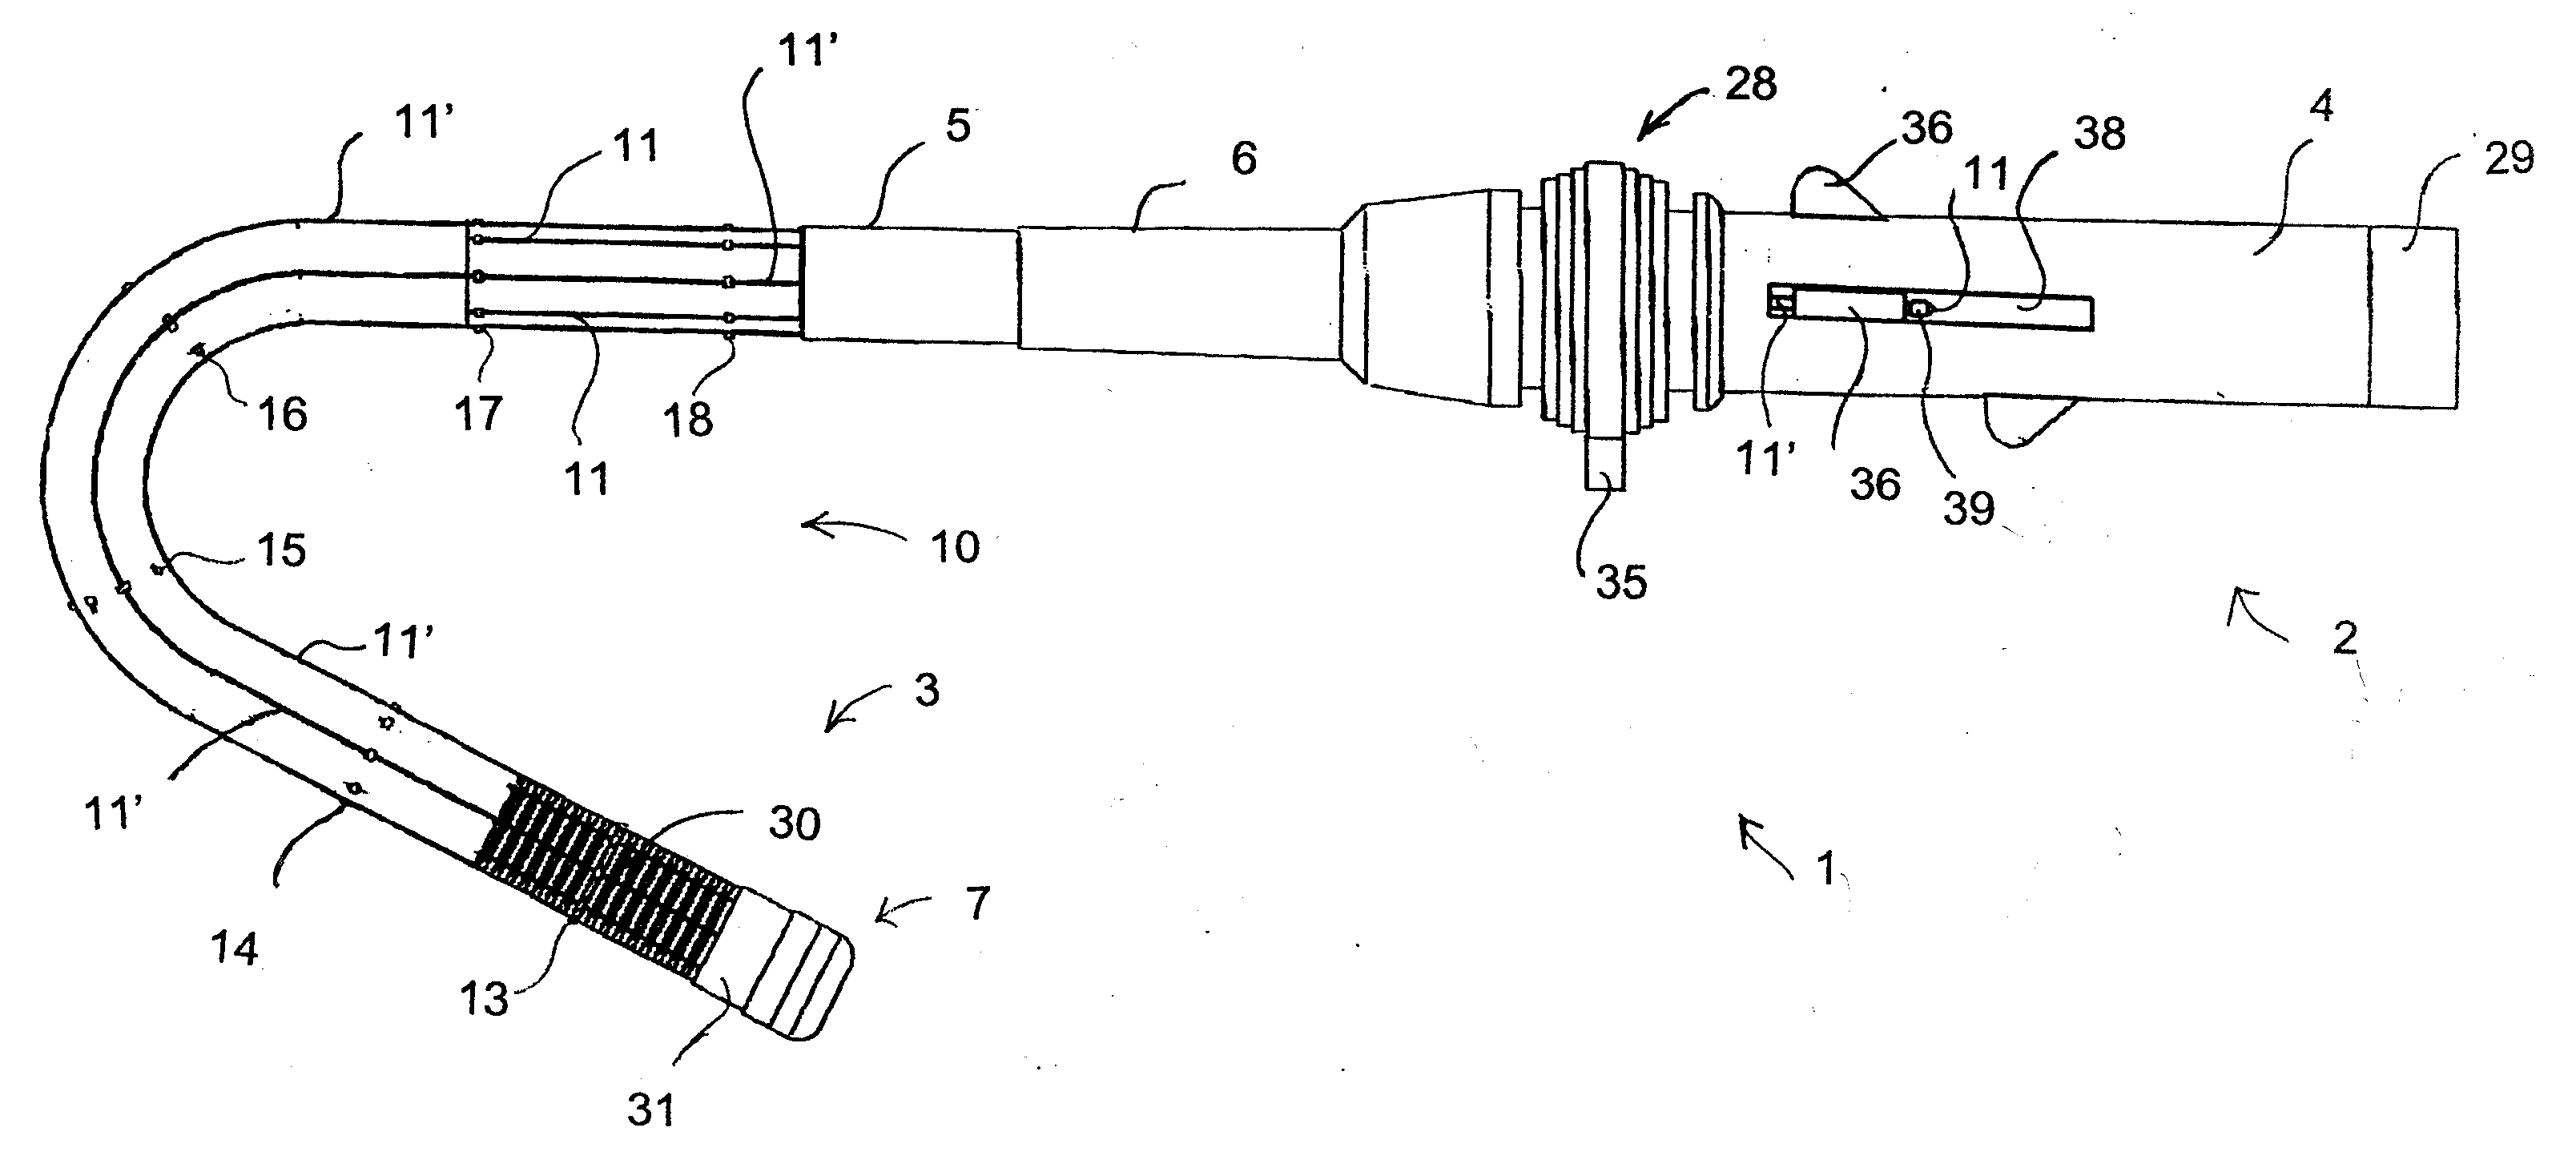 Torque-Transmitting, Variably-Flexible, Corrugated Insertion Device and Method for Transmitting Torque and Variably Flexing a Corrugated Insertion Device